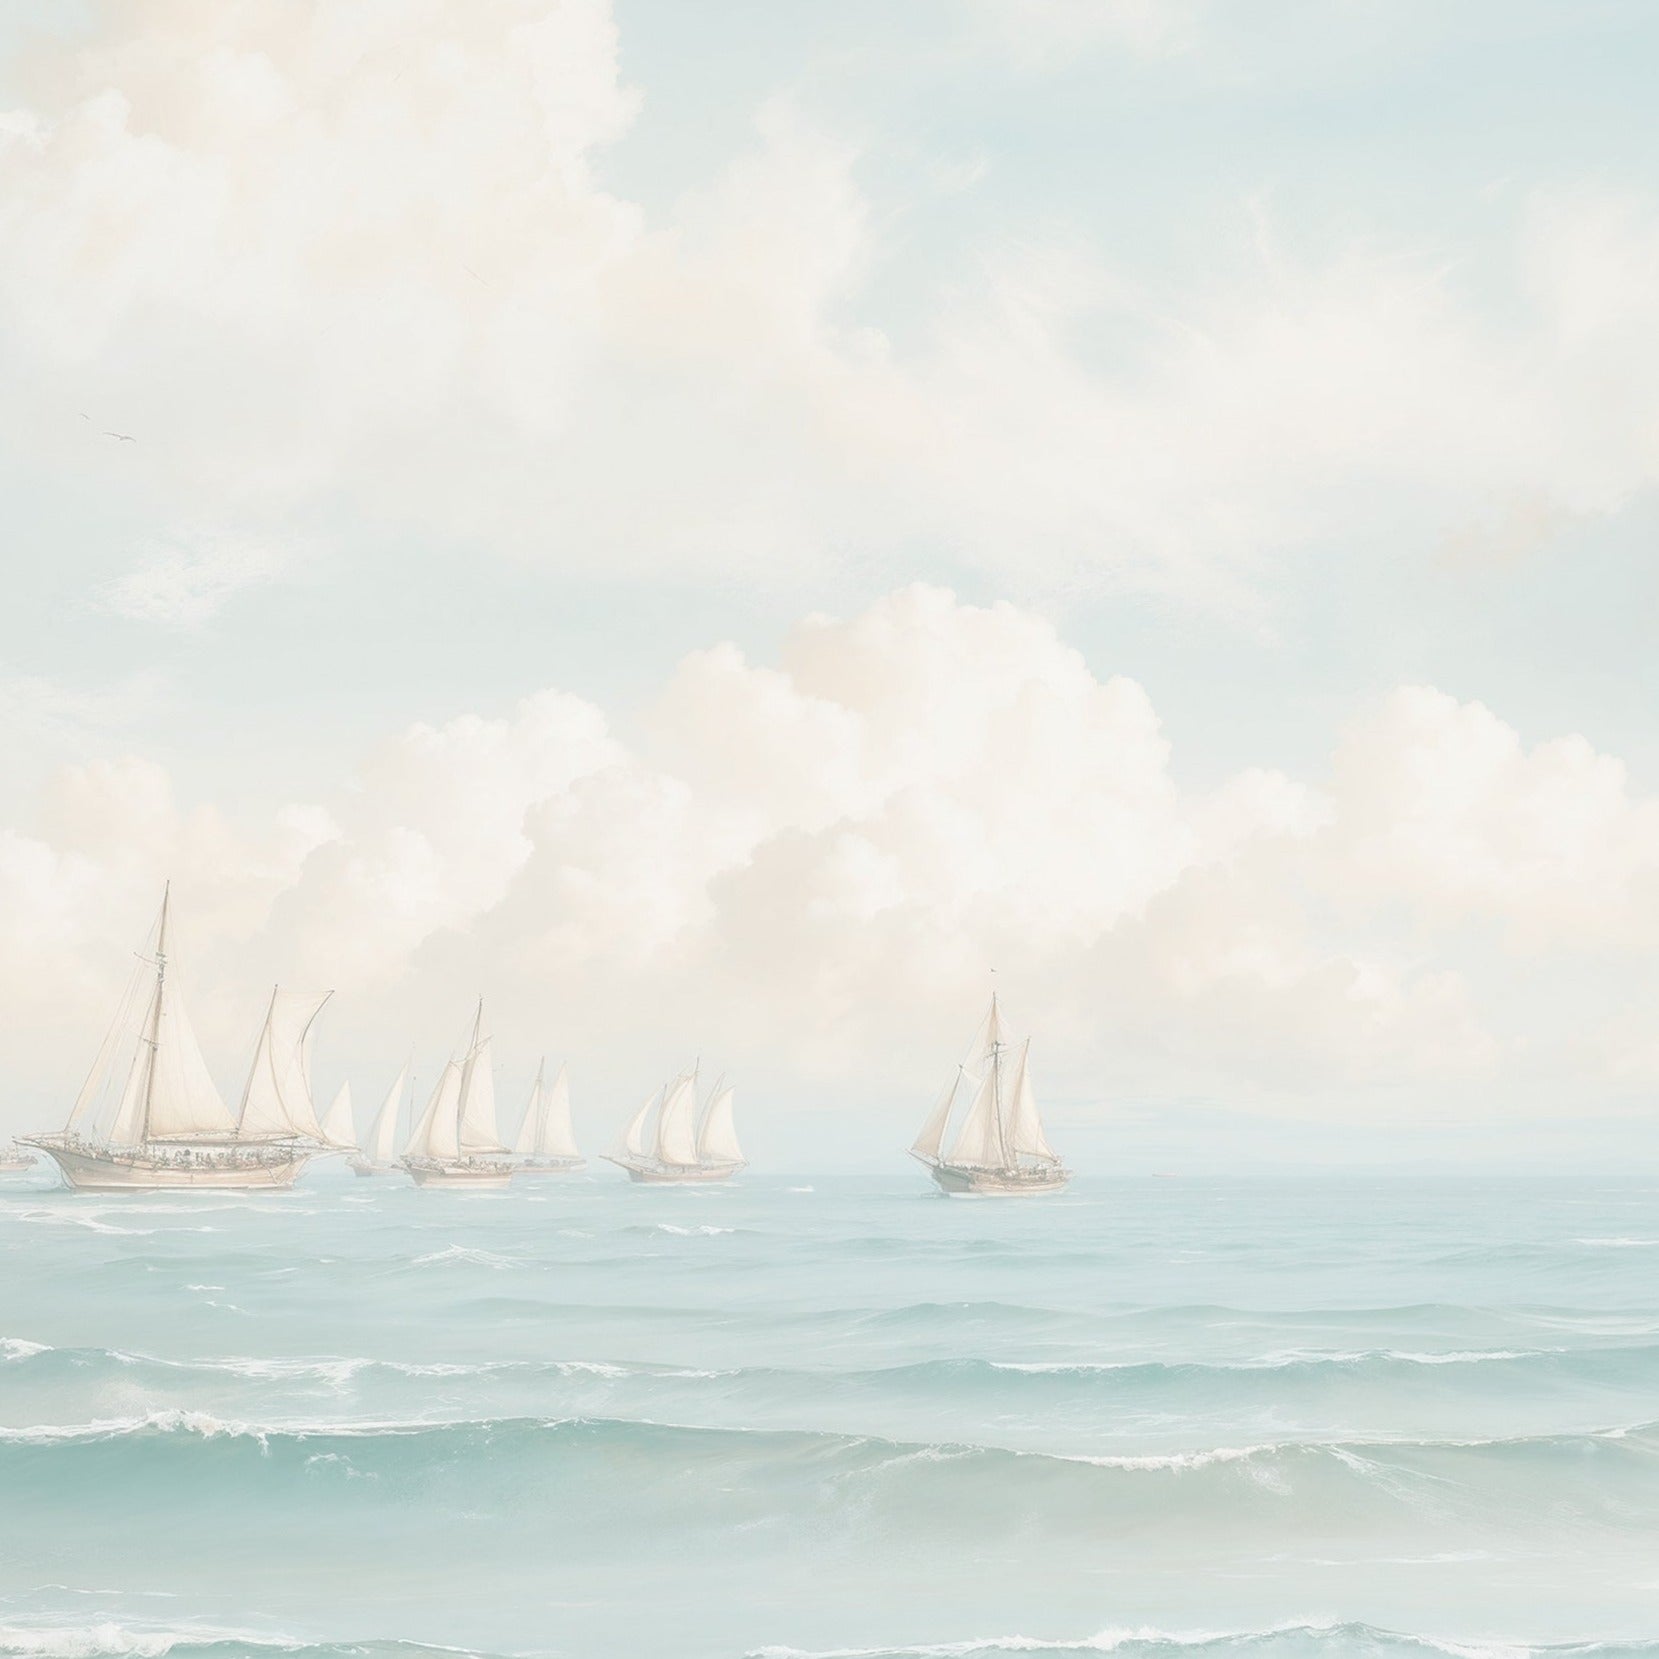 A close-up of a peaceful seascape mural with several sailboats, focusing on the soft waves and gentle clouds, evoking a calming and tranquil atmosphere.